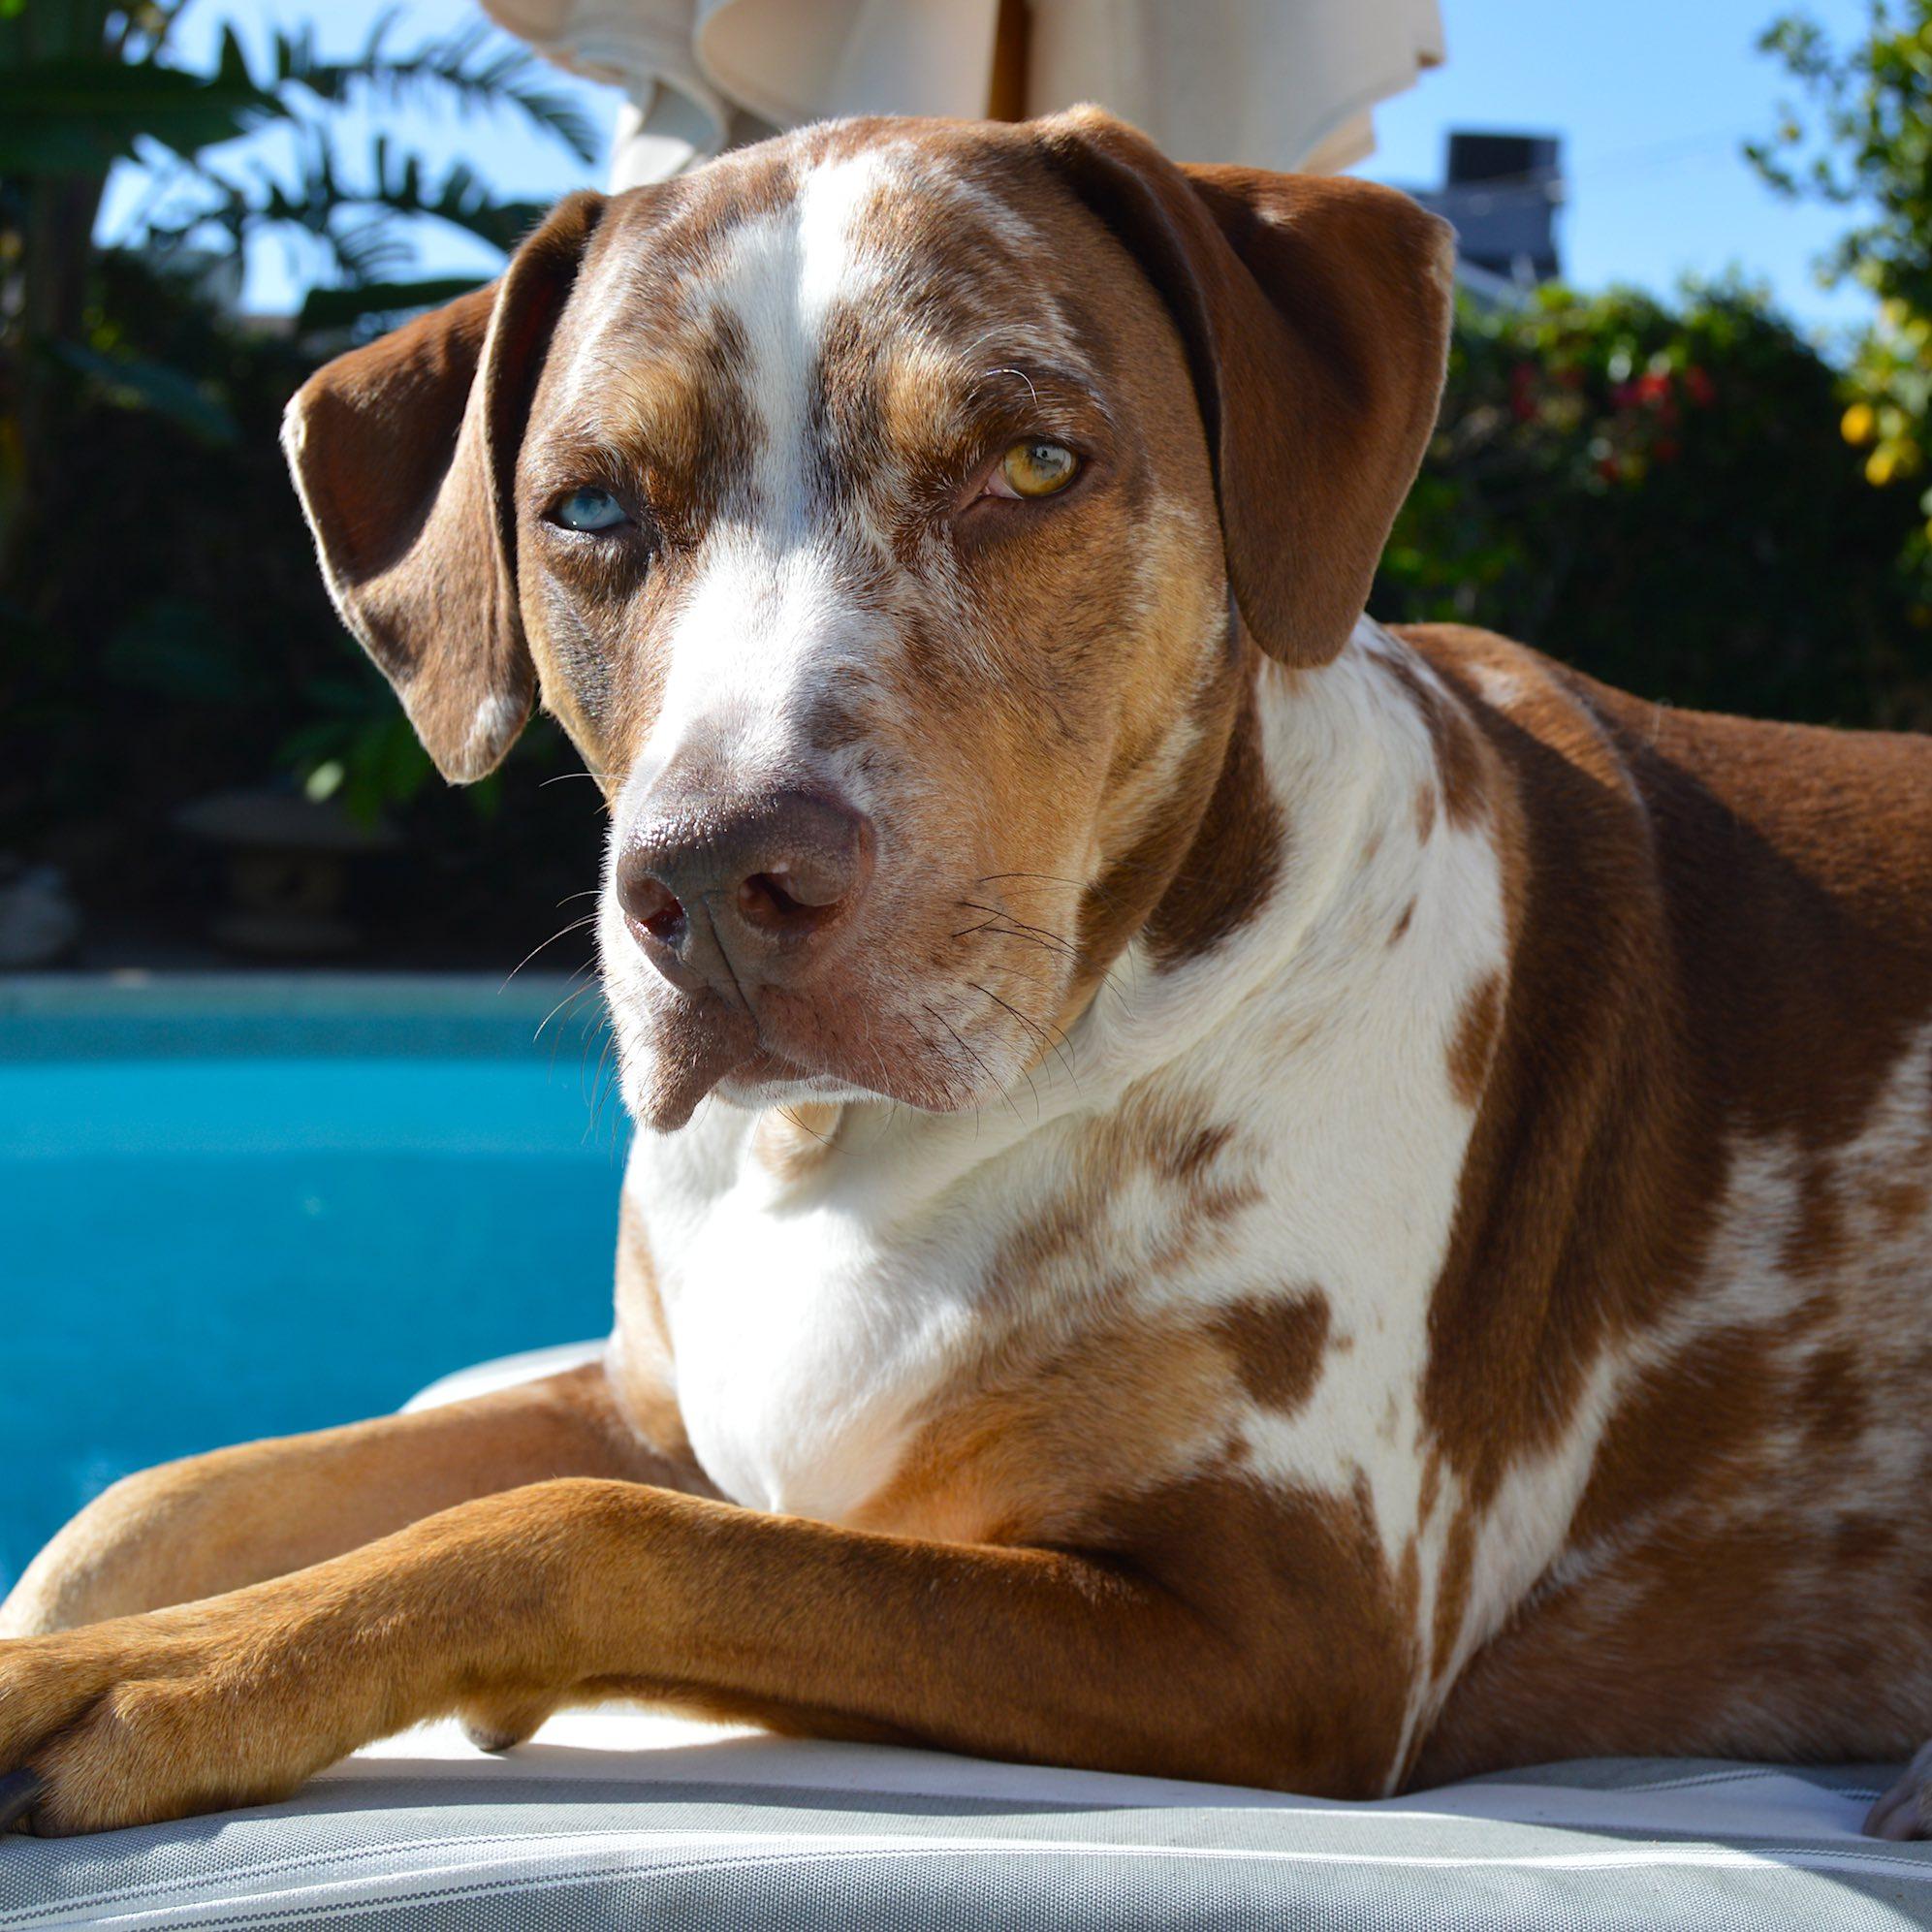 This is our favorite pet. His name is Rosko and he is a 6-year-old Catahoula Leopard dog. He loves to swim and retrieve. He’s very sweet and amazingly smart. – Catherine West, Van Nuys, Ca.